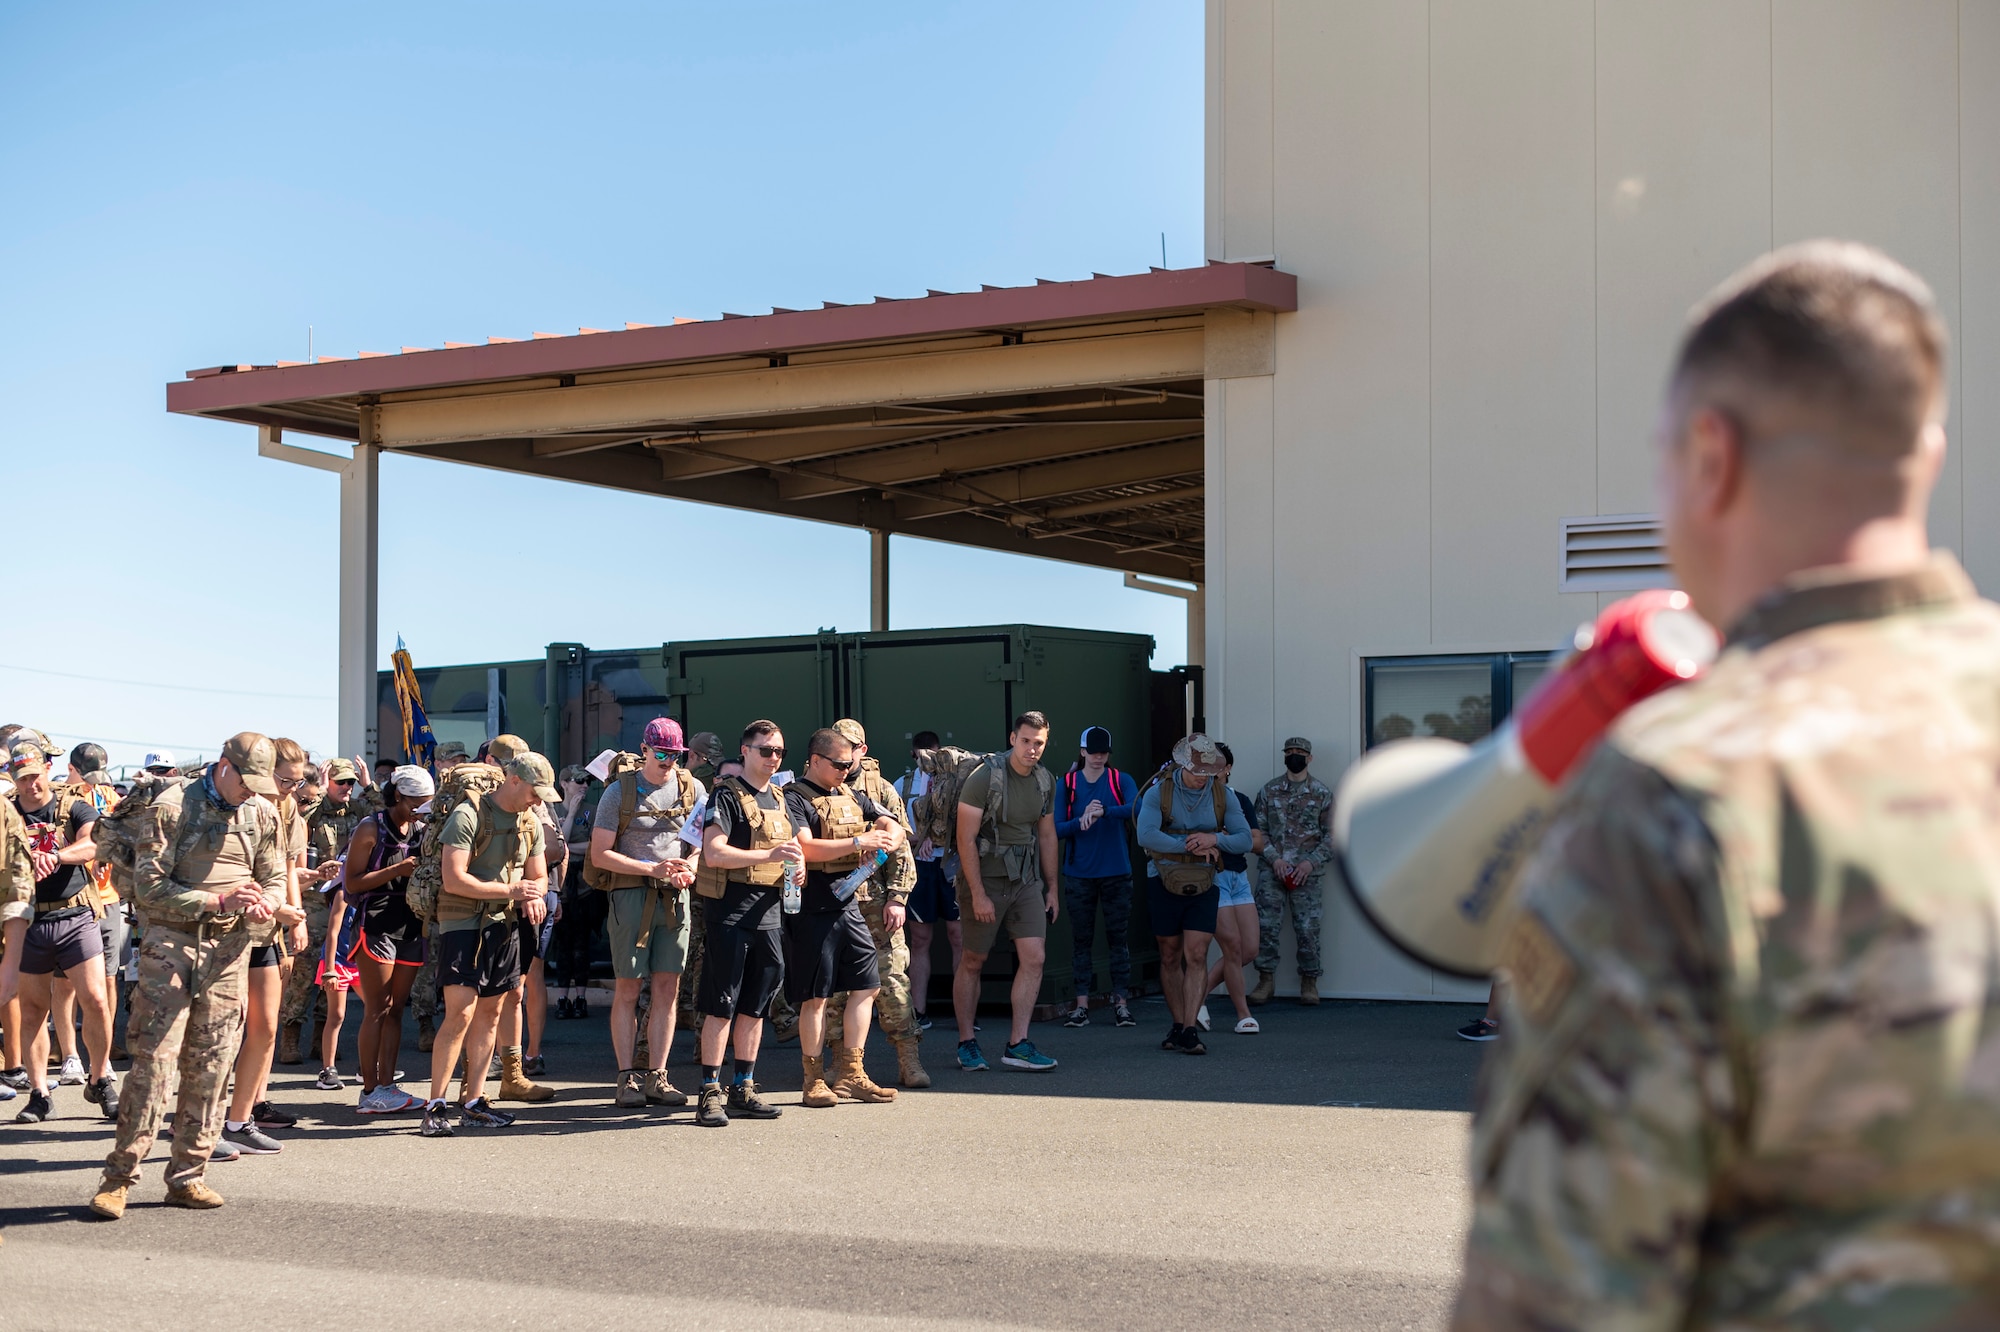 An Airman uses a megaphone to talk to other Airmen.